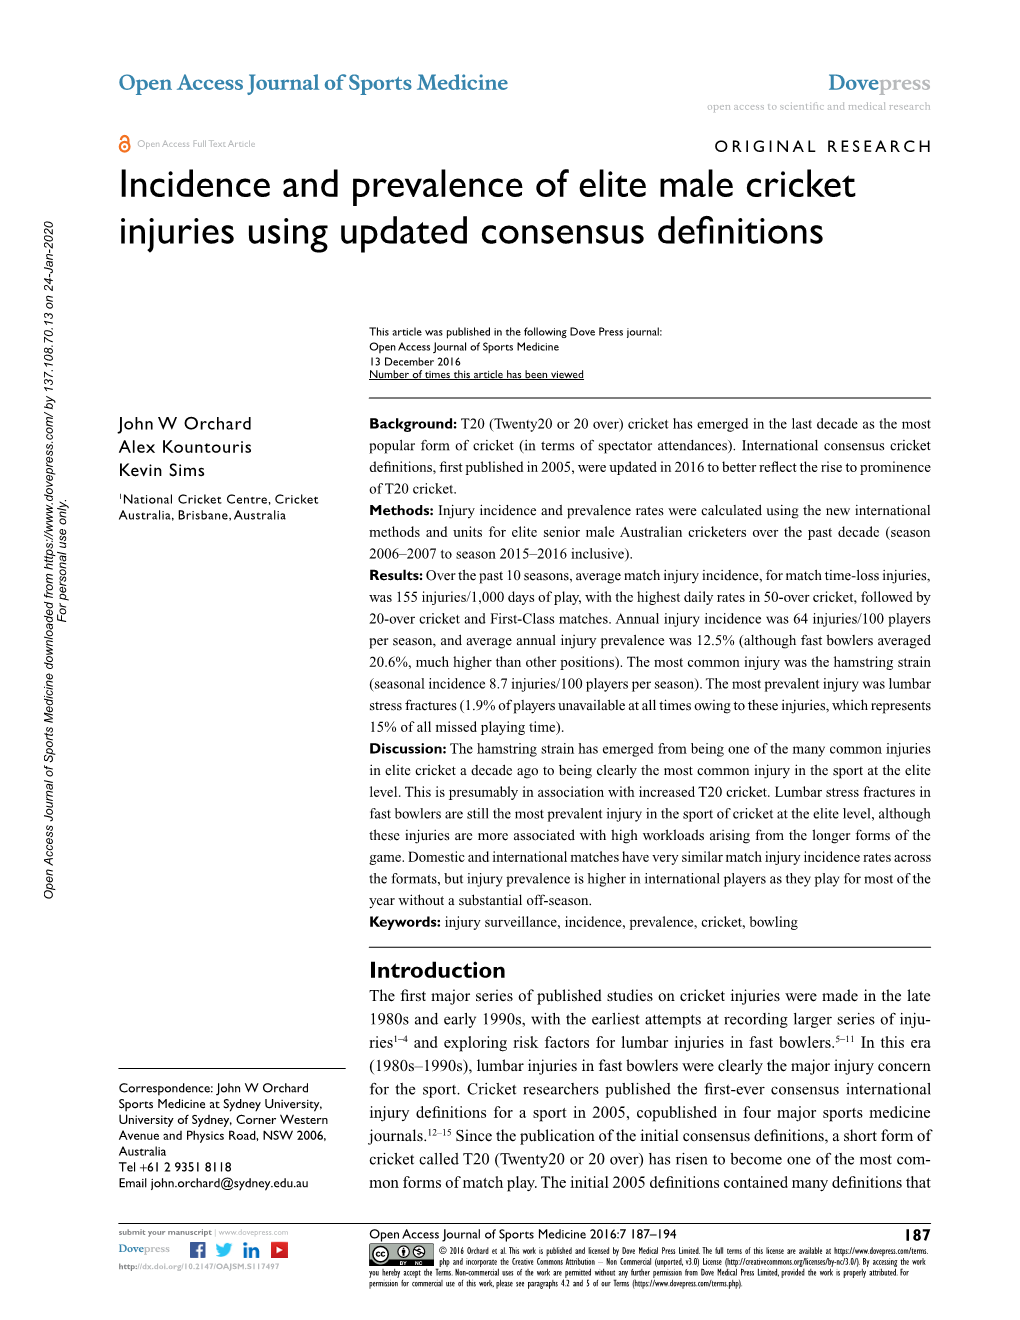 Incidence and Prevalence of Elite Male Cricket Injuries Using Updated Consensus Definitions